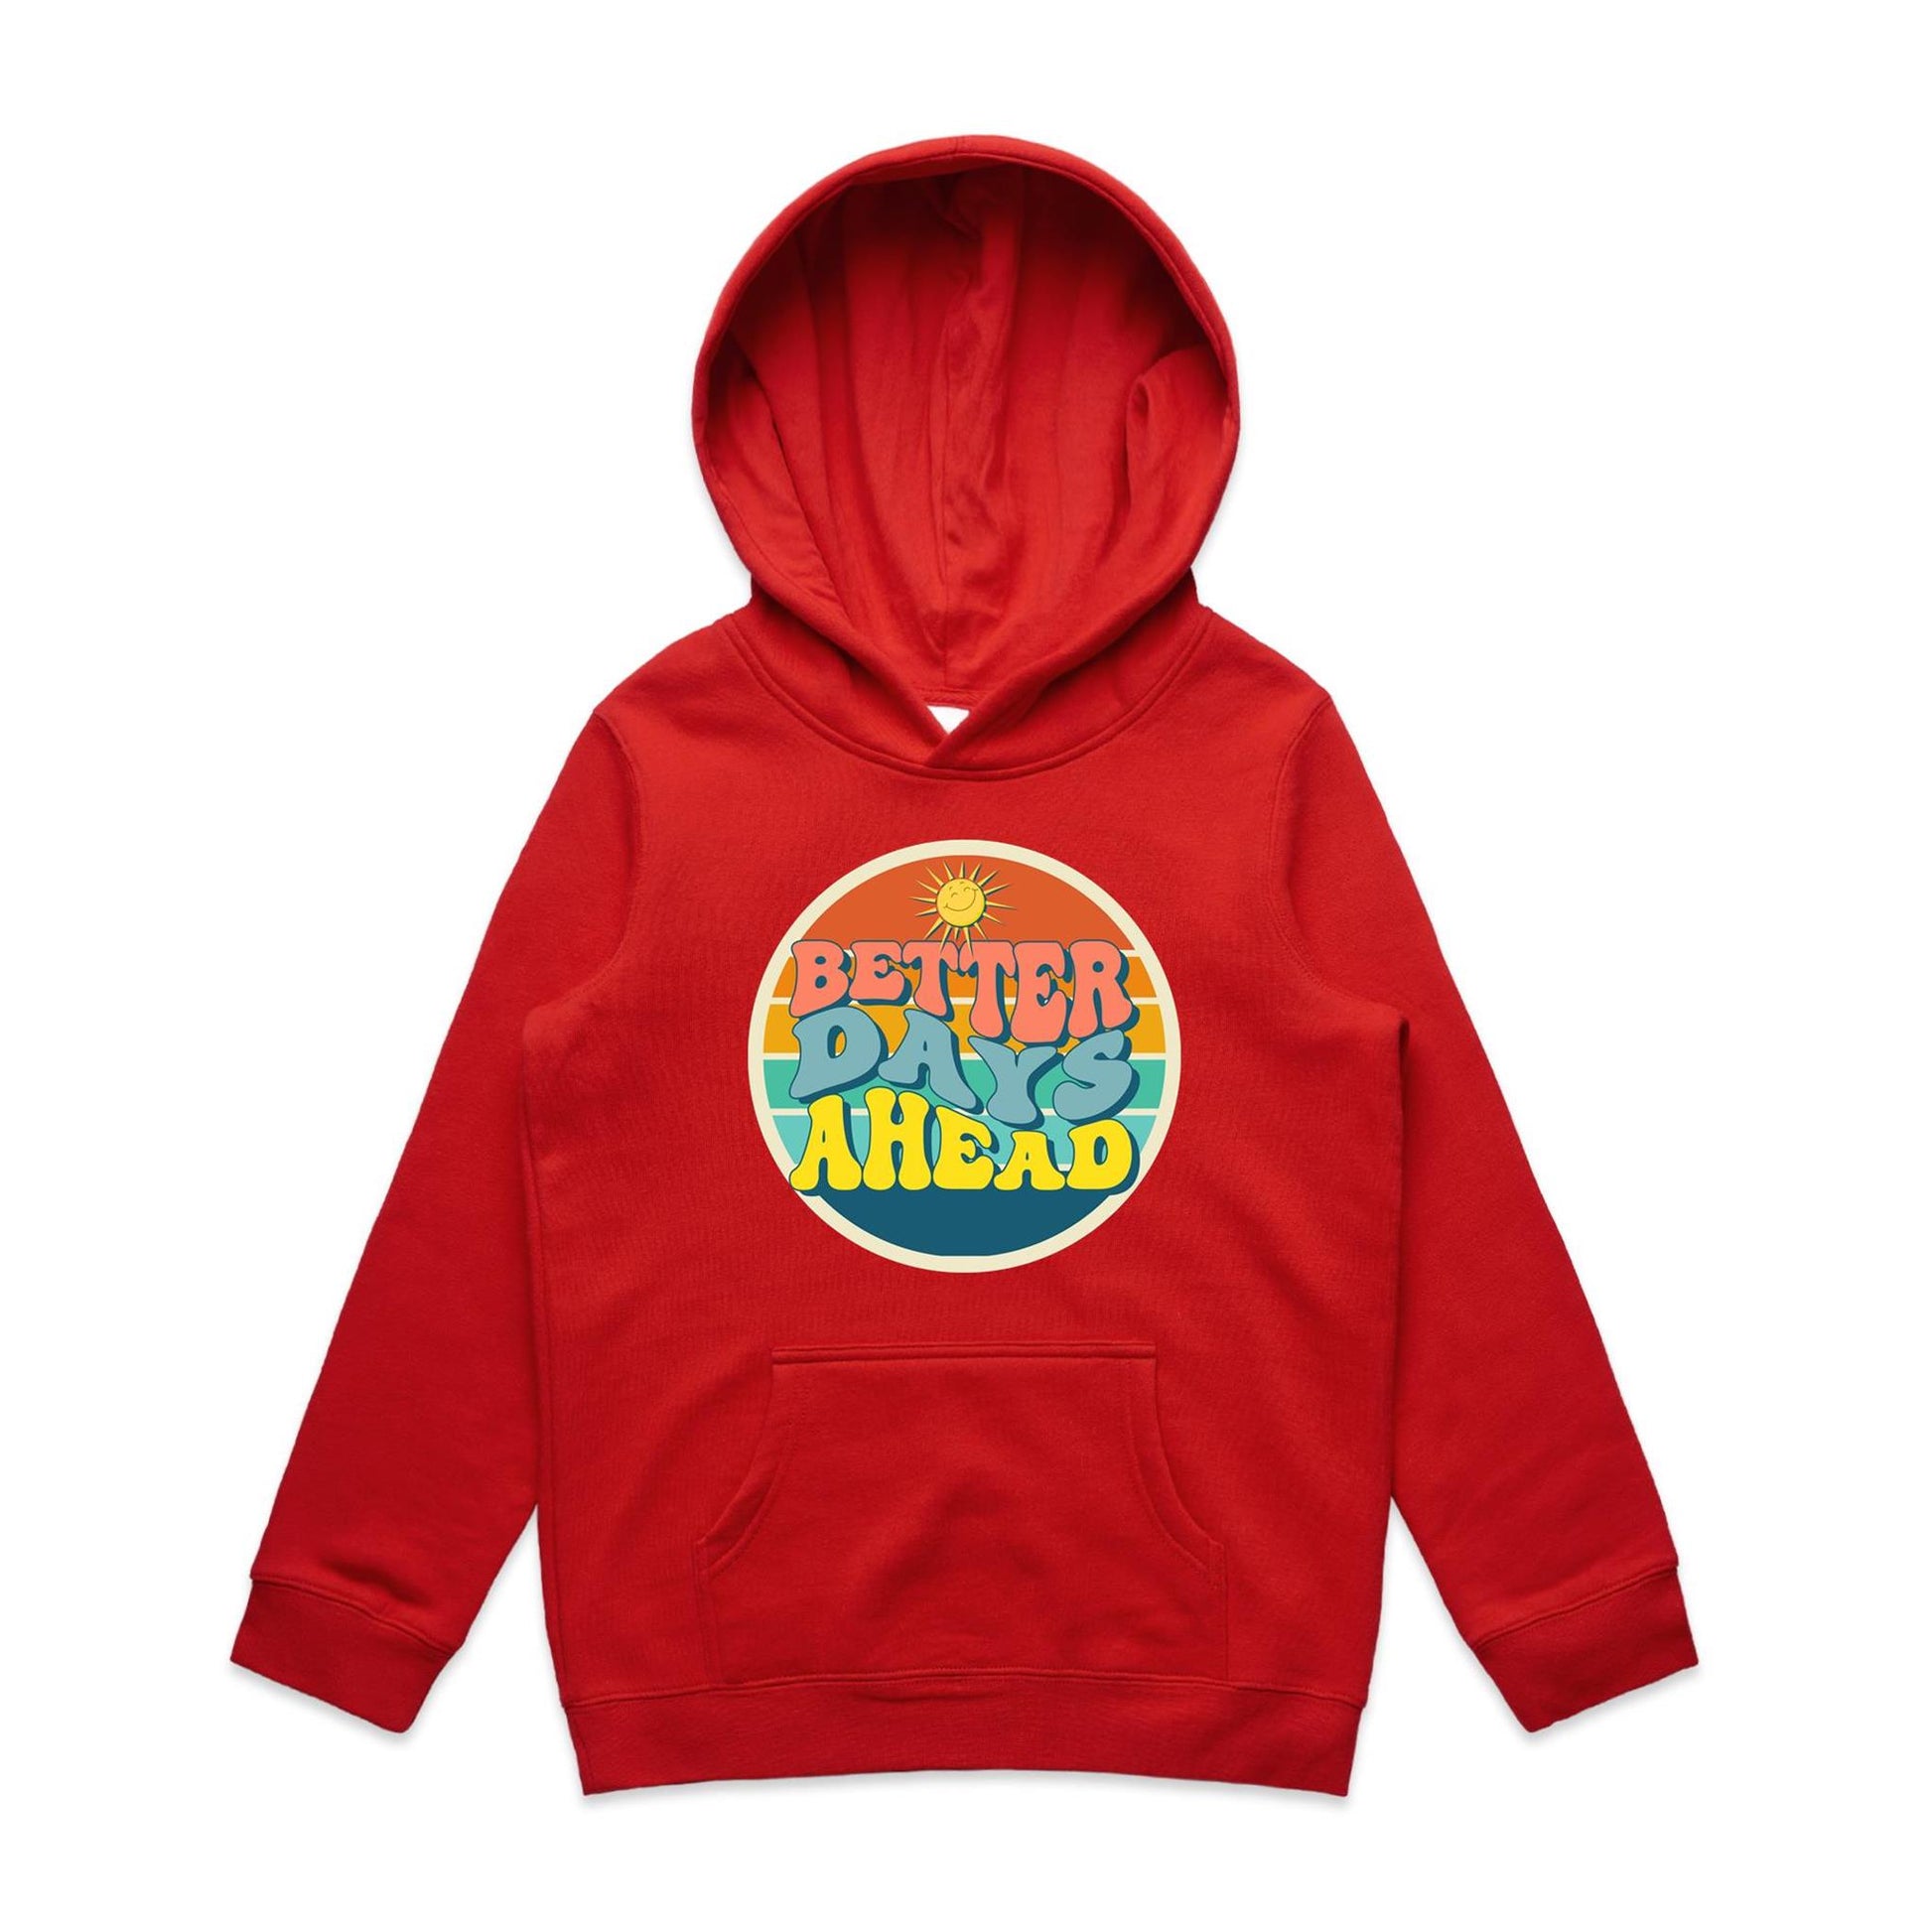 Better Days Ahead - Youth Supply Hood Red Kids Hoodie Motivation Retro